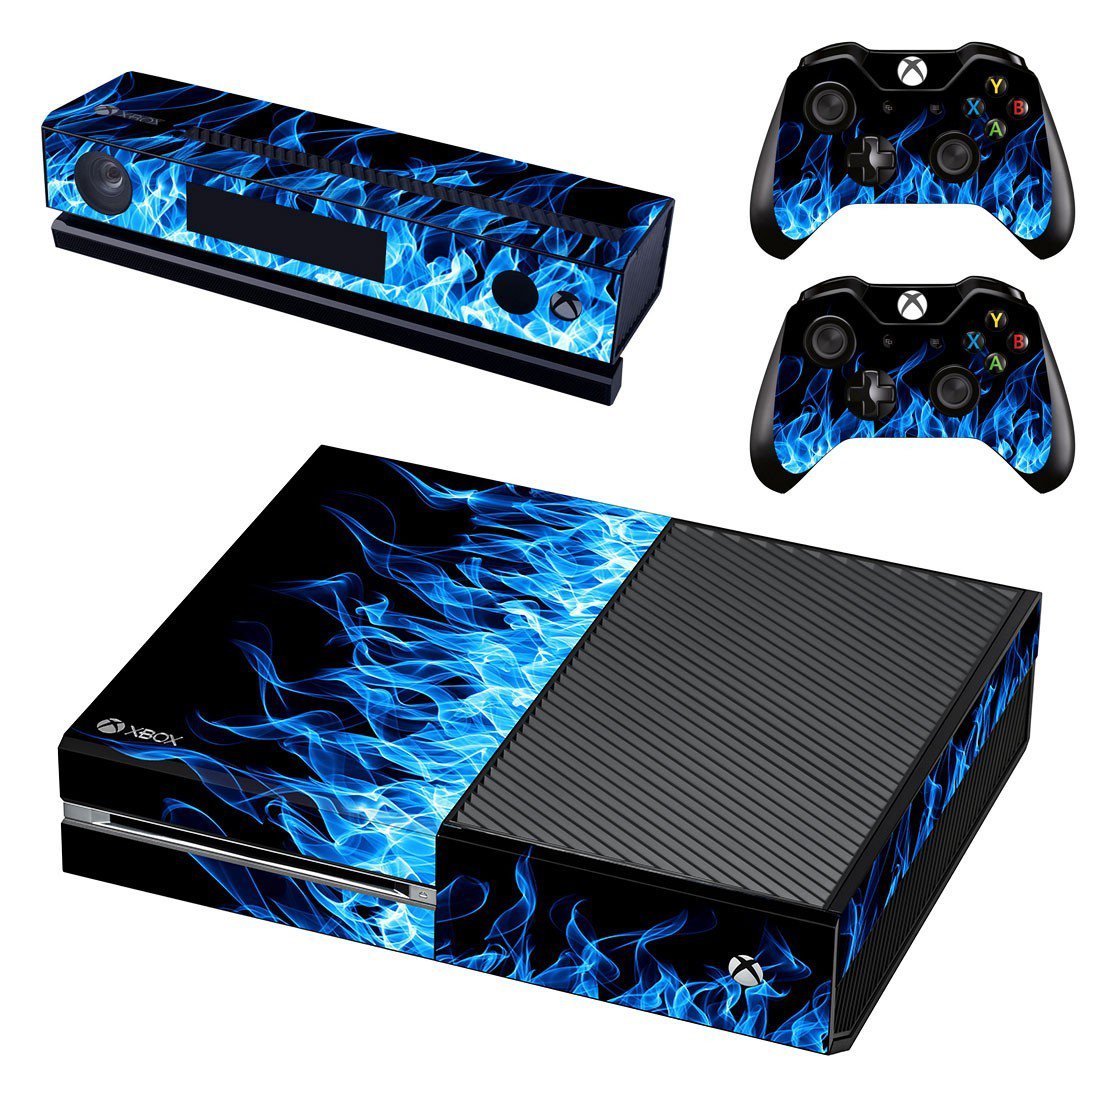 Blue Fire Flame Cover For Xbox One